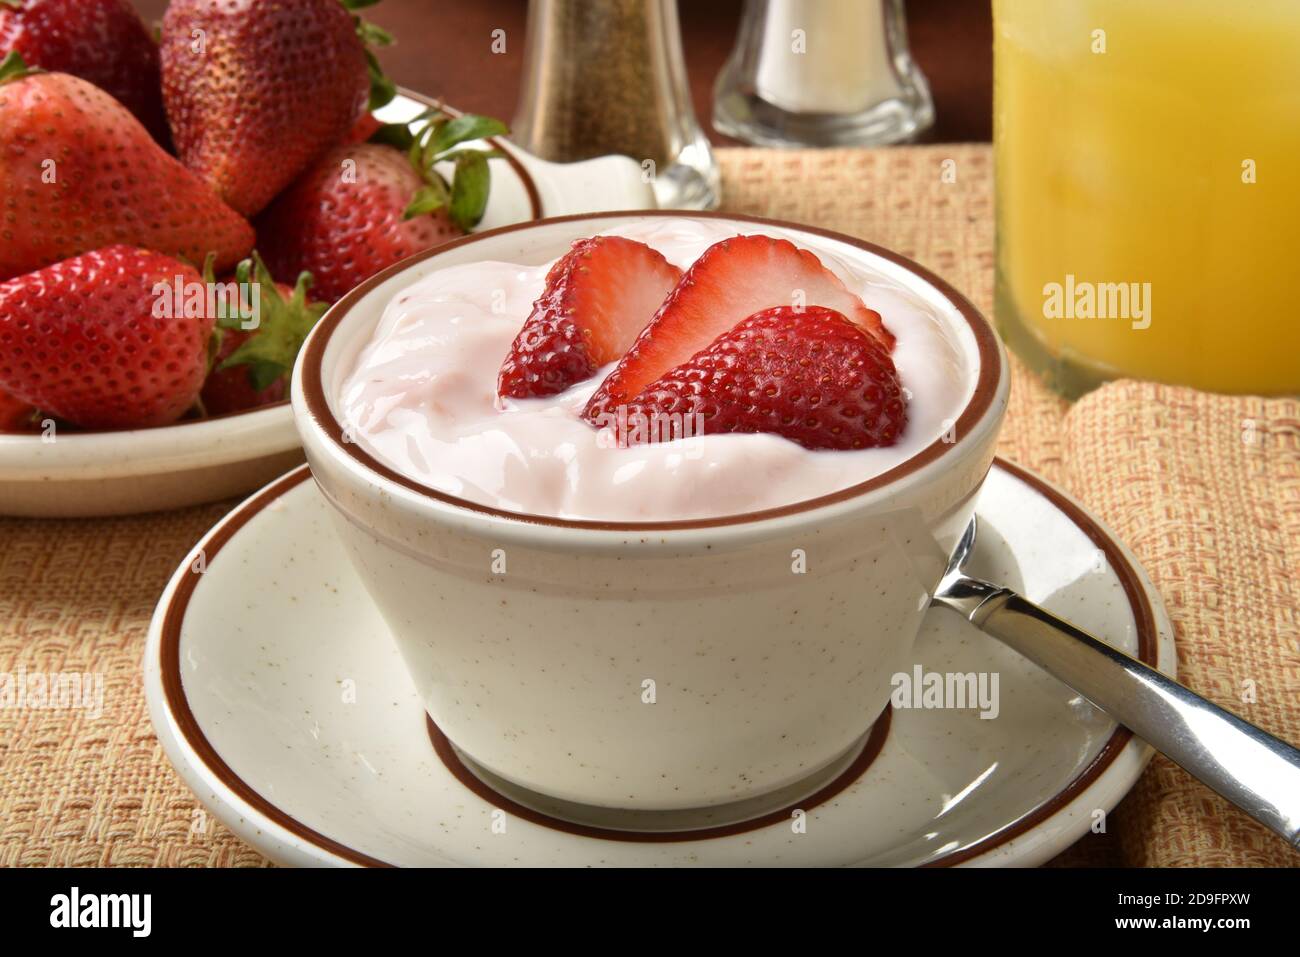 A bowl of strawberry yogurt with a glass of orang ejuice Stock Photo